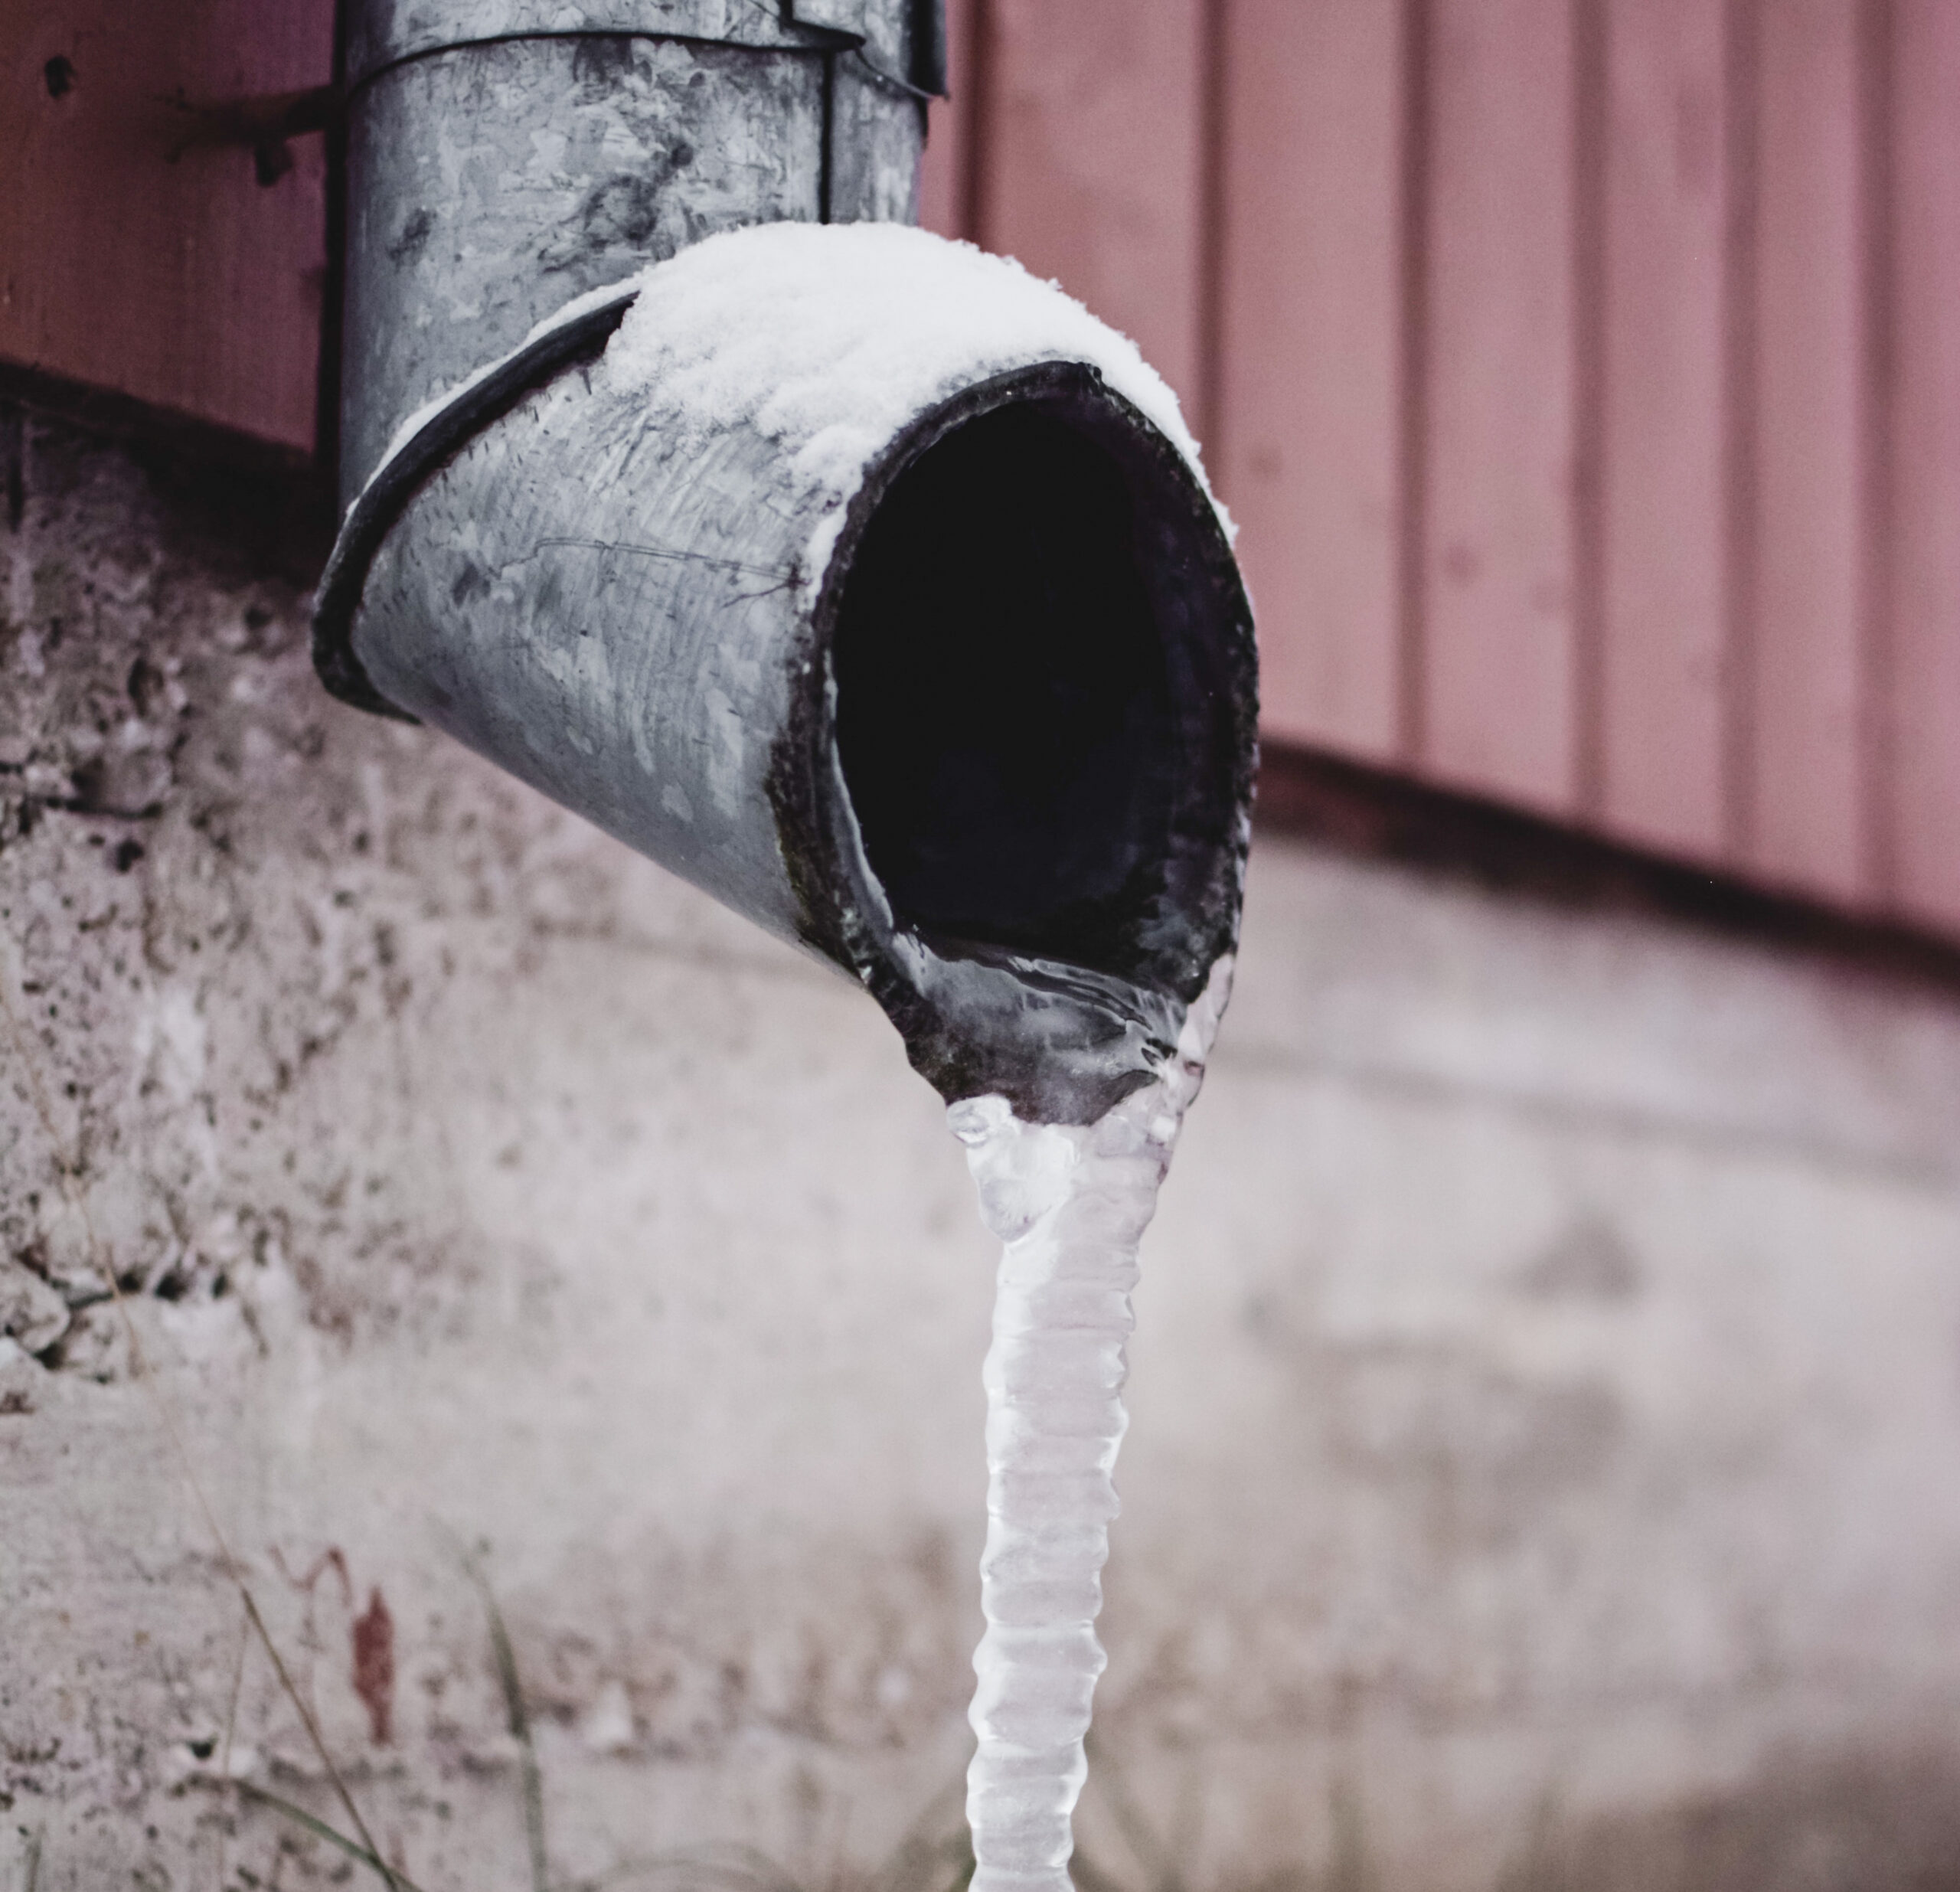 How to keep pipes from freezing in winter by Mario Villarino